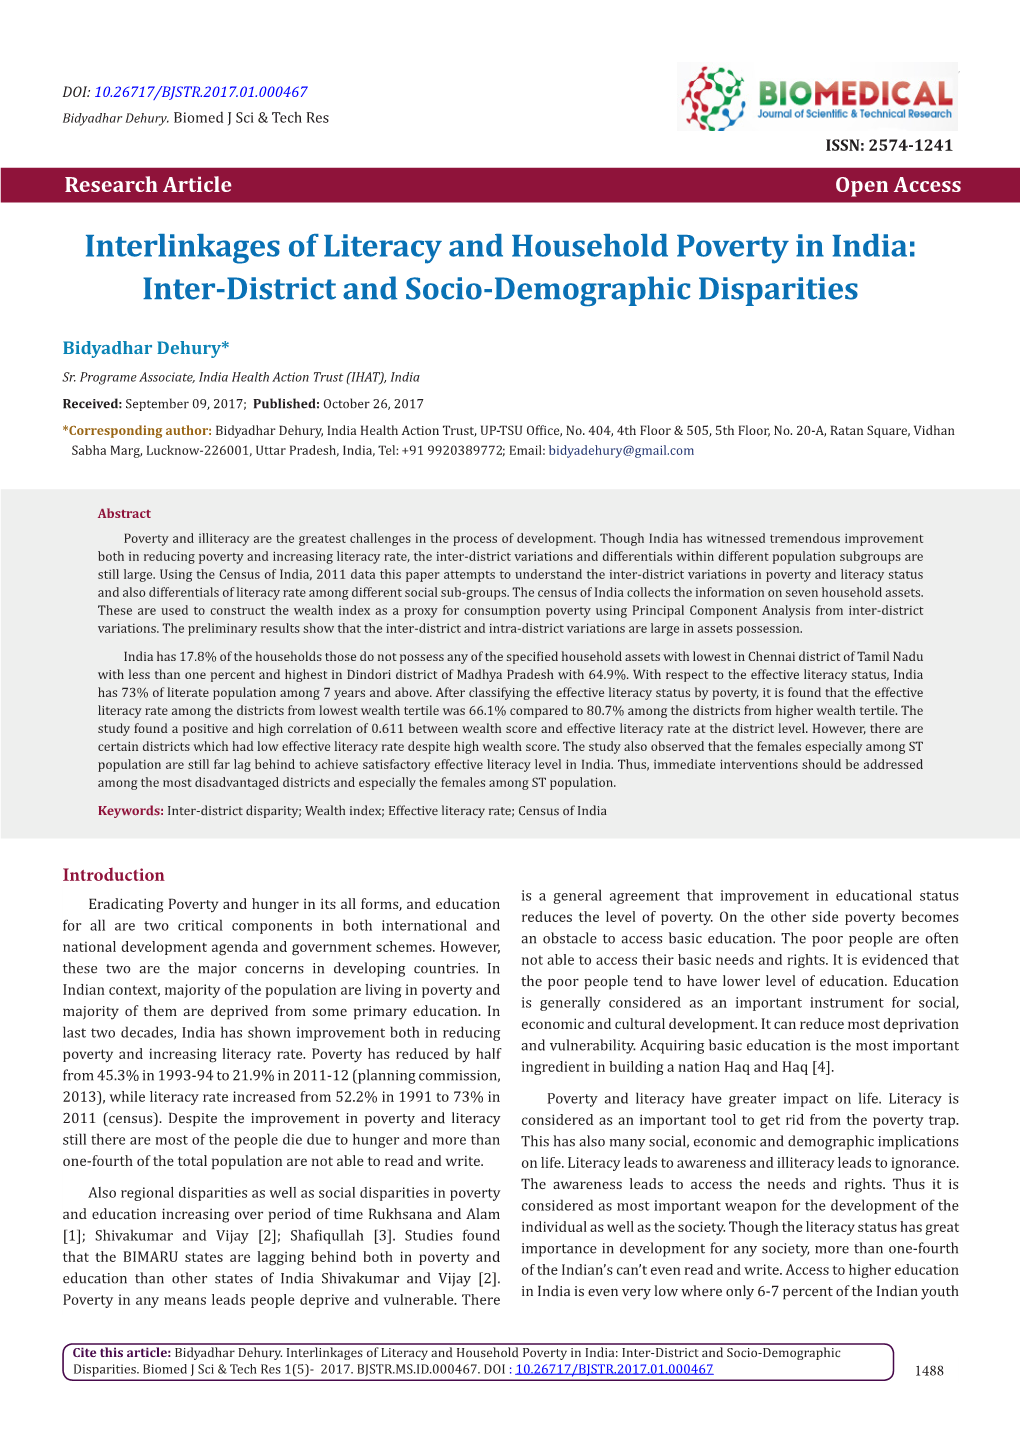 Interlinkages of Literacy and Household Poverty in India: Inter-District and Socio-Demographic Disparities